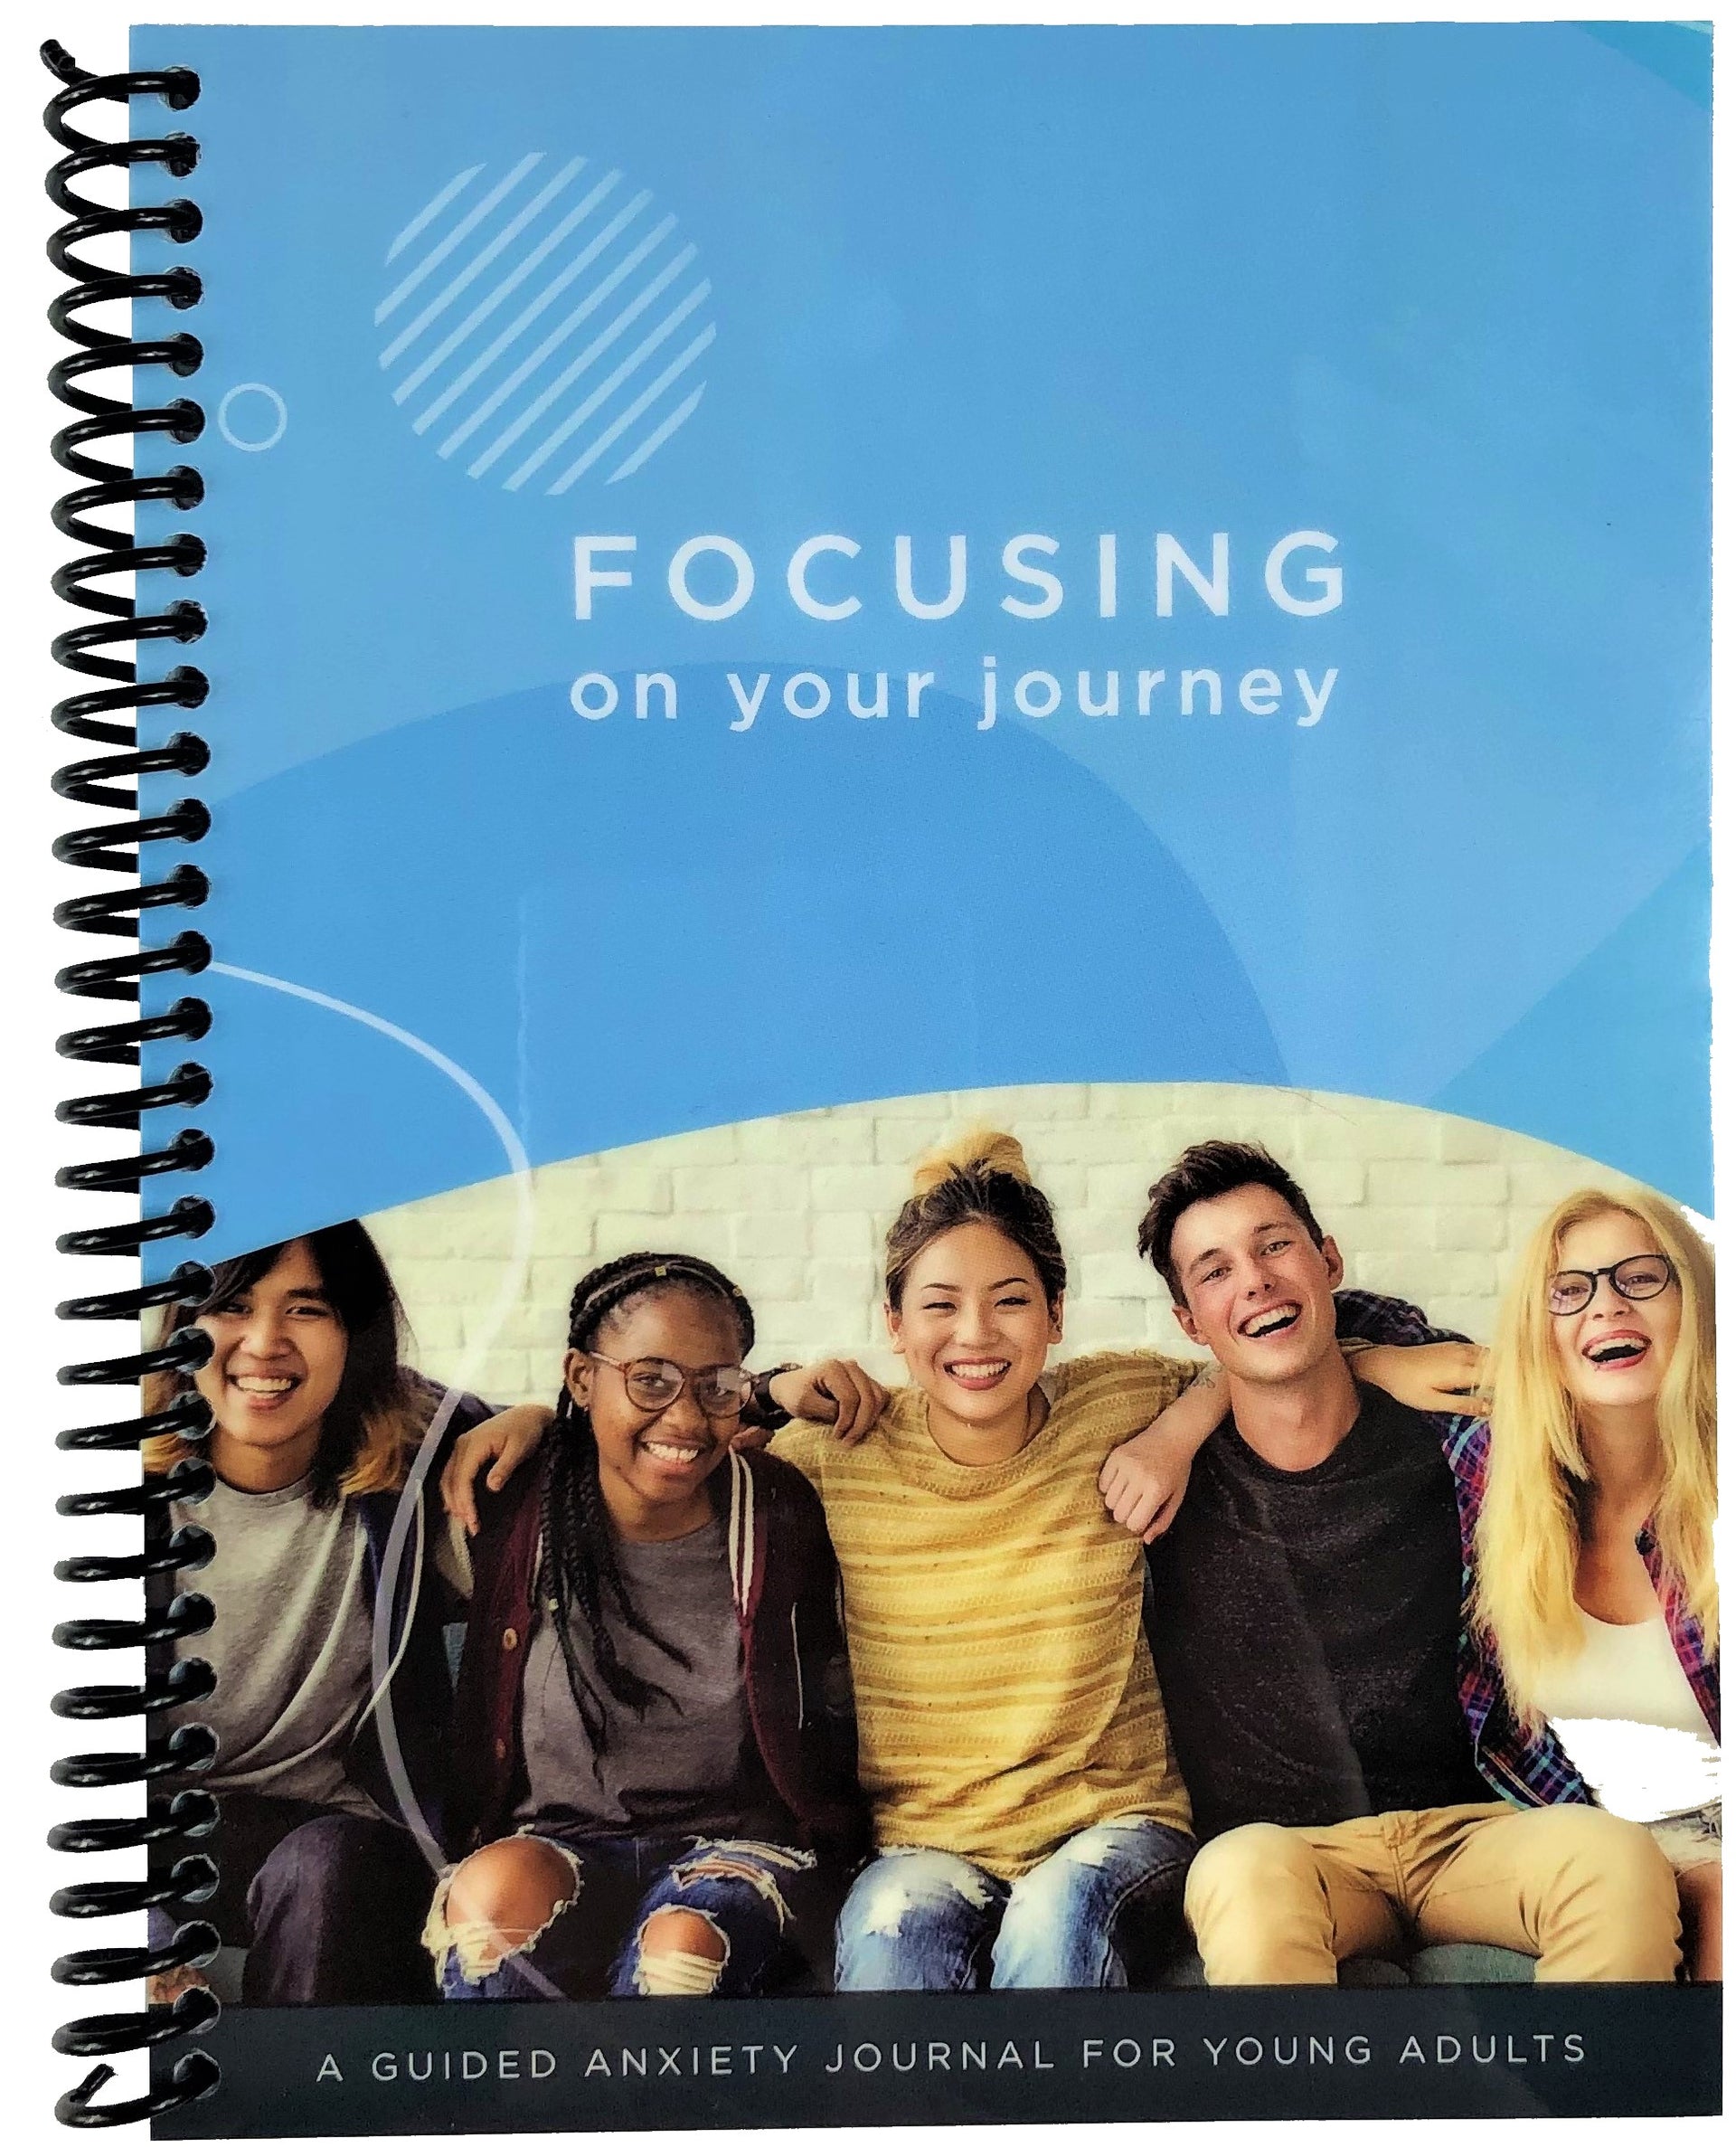 RE-FOCUS THE CREATIVE OFFICE, Focusing on your Journey: A Guided Anxiety Journal for Young Adults